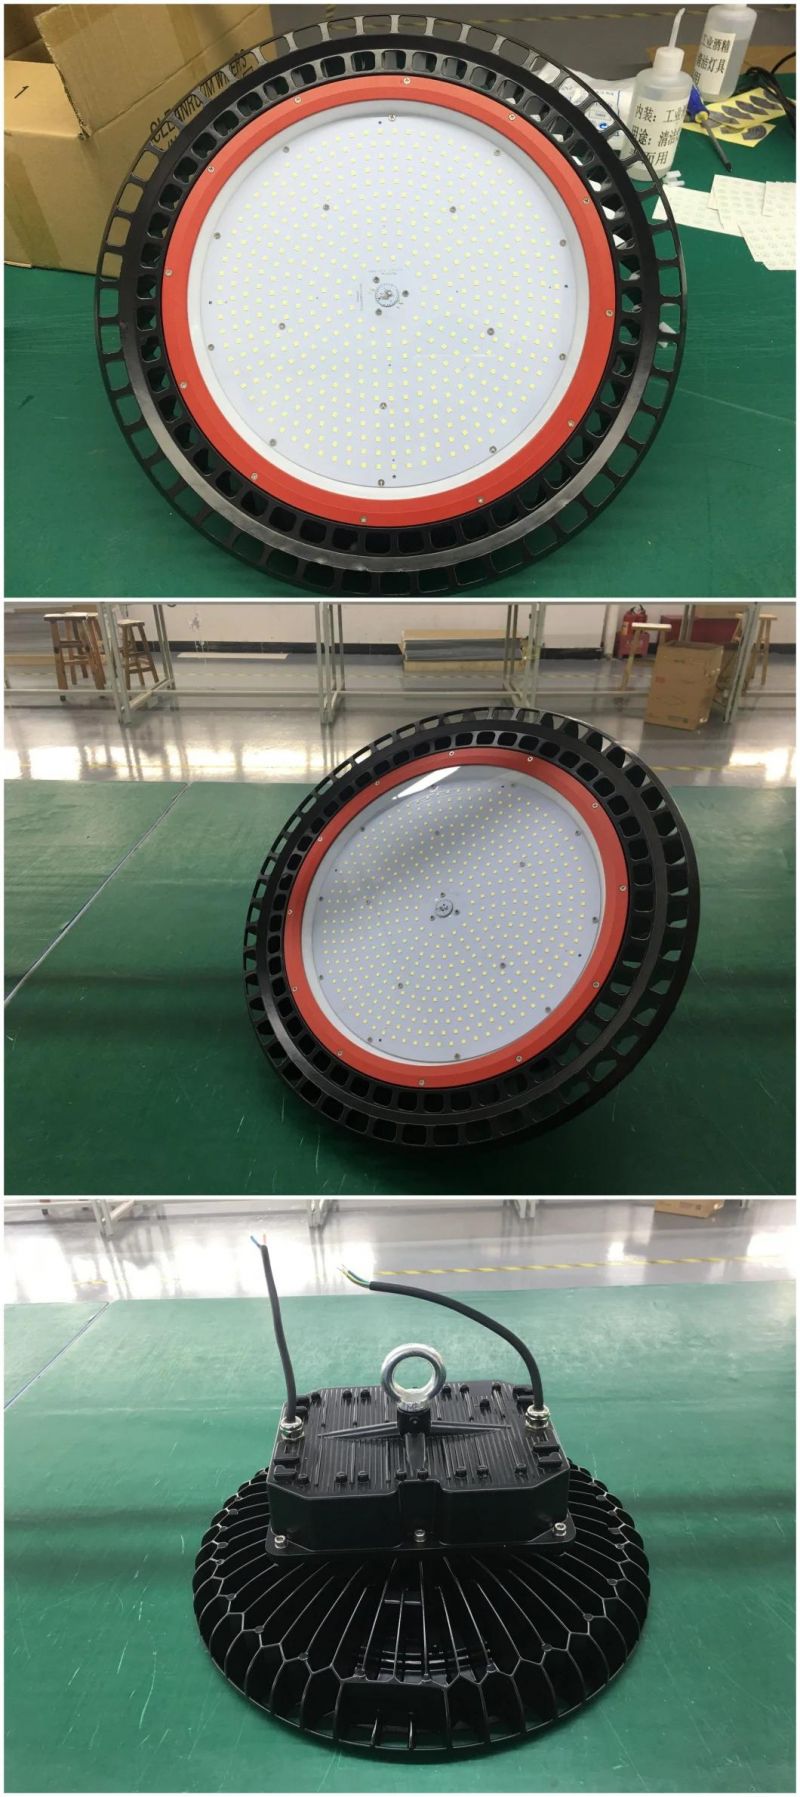 Quality-Assured 300W UFO LED Industrial Lighting for Indoor Basketball Court